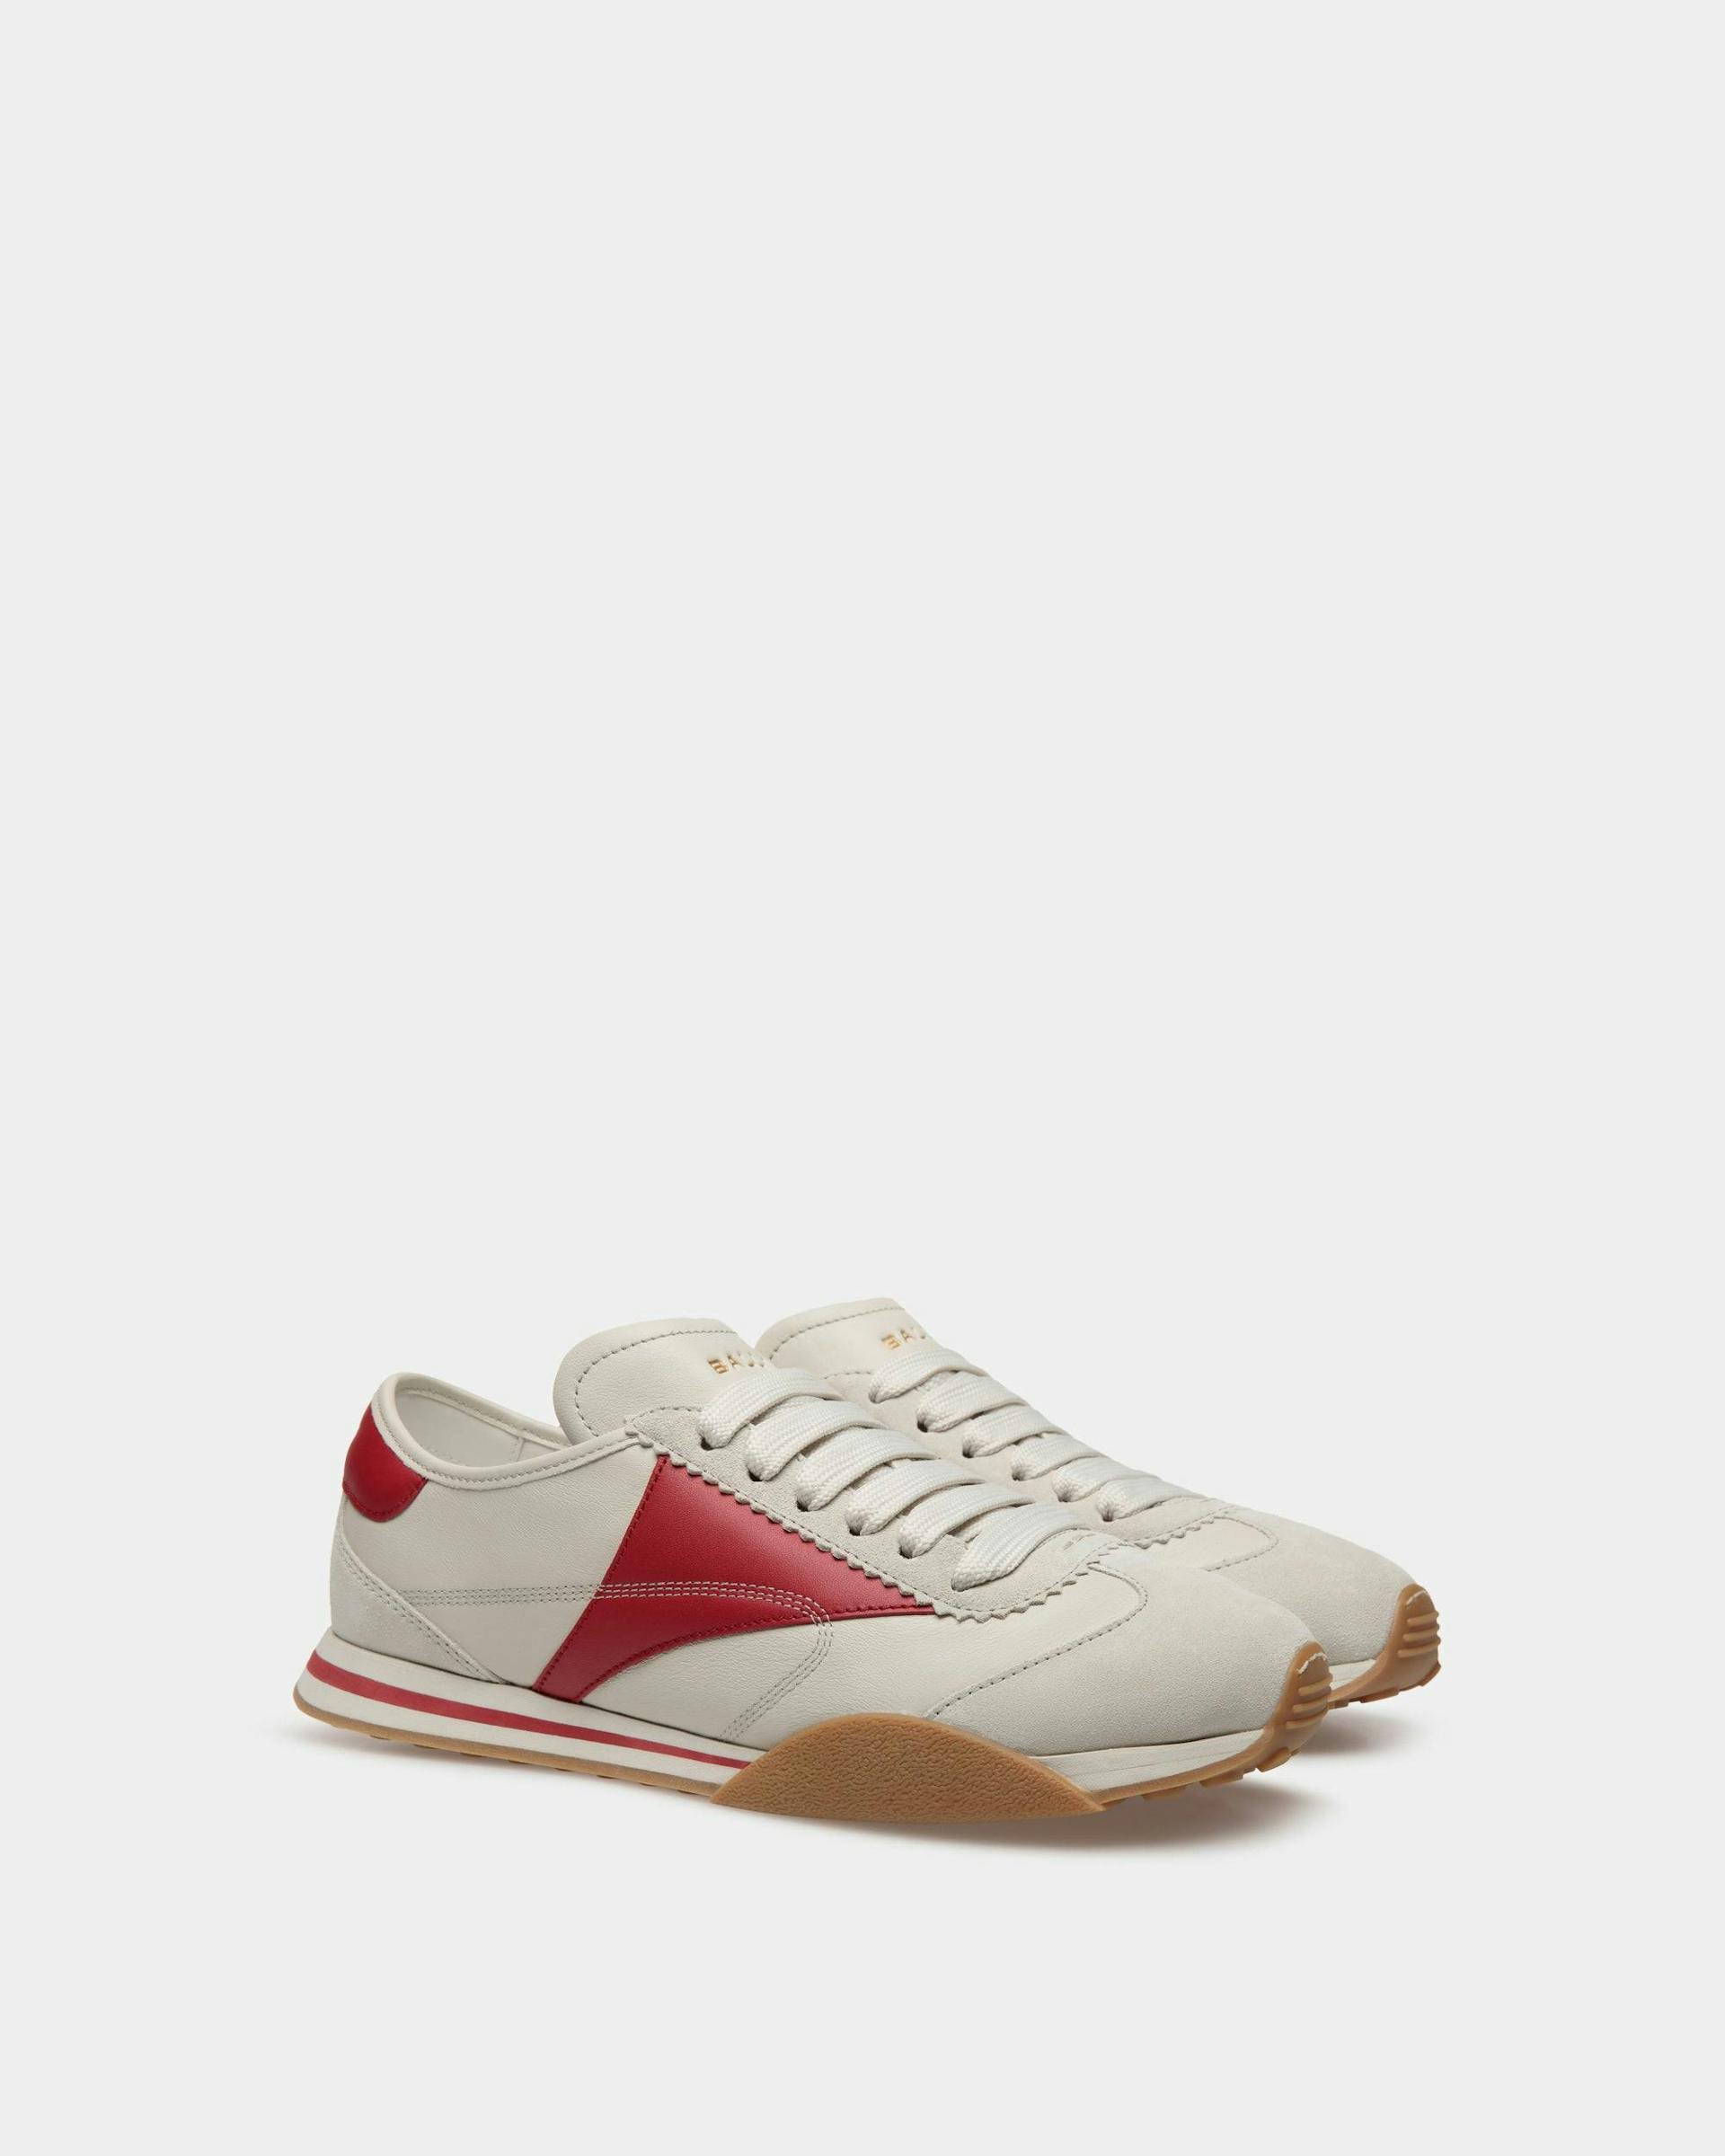 Men's Sussex Sneakers In Dusty White And Deep Ruby Leather | Bally | Still Life 3/4 Front